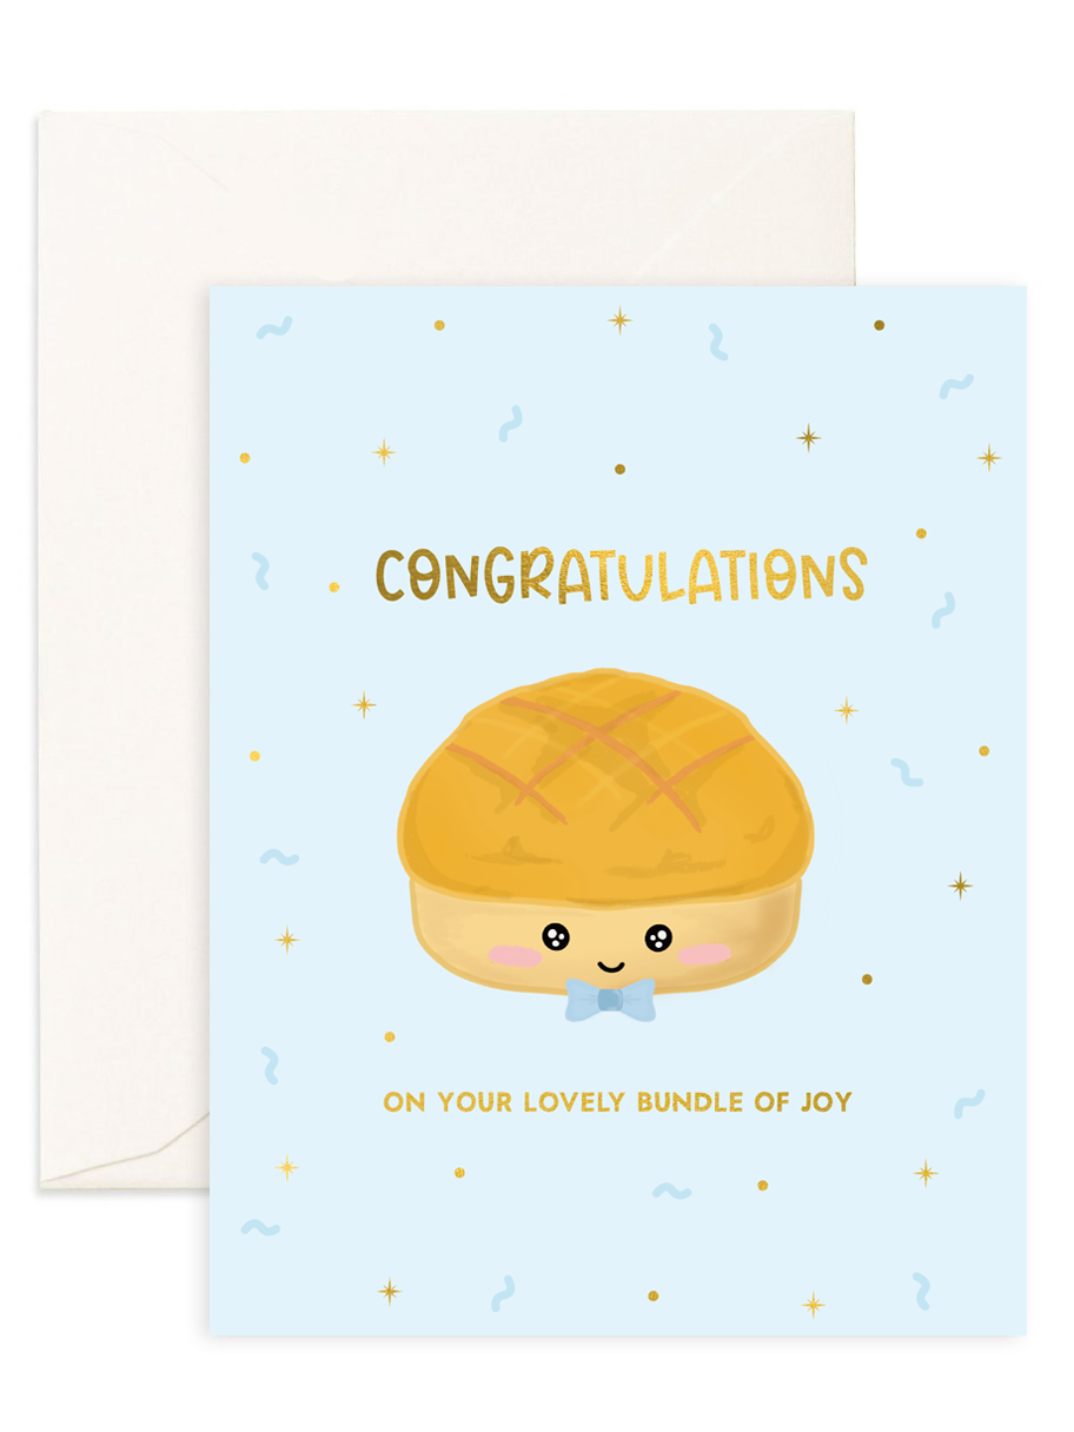 Format: Bi-fold, 108 x 140mm  Material: Premium Stock with a luxurious matte texture Features: Blank Interior Foil: Gold Foil Envelope: Cream Colours may slightly vary Designed in Hong Kong cute eco-friendly greeting card for new moms printed on recycled paper perfect baby shower gift